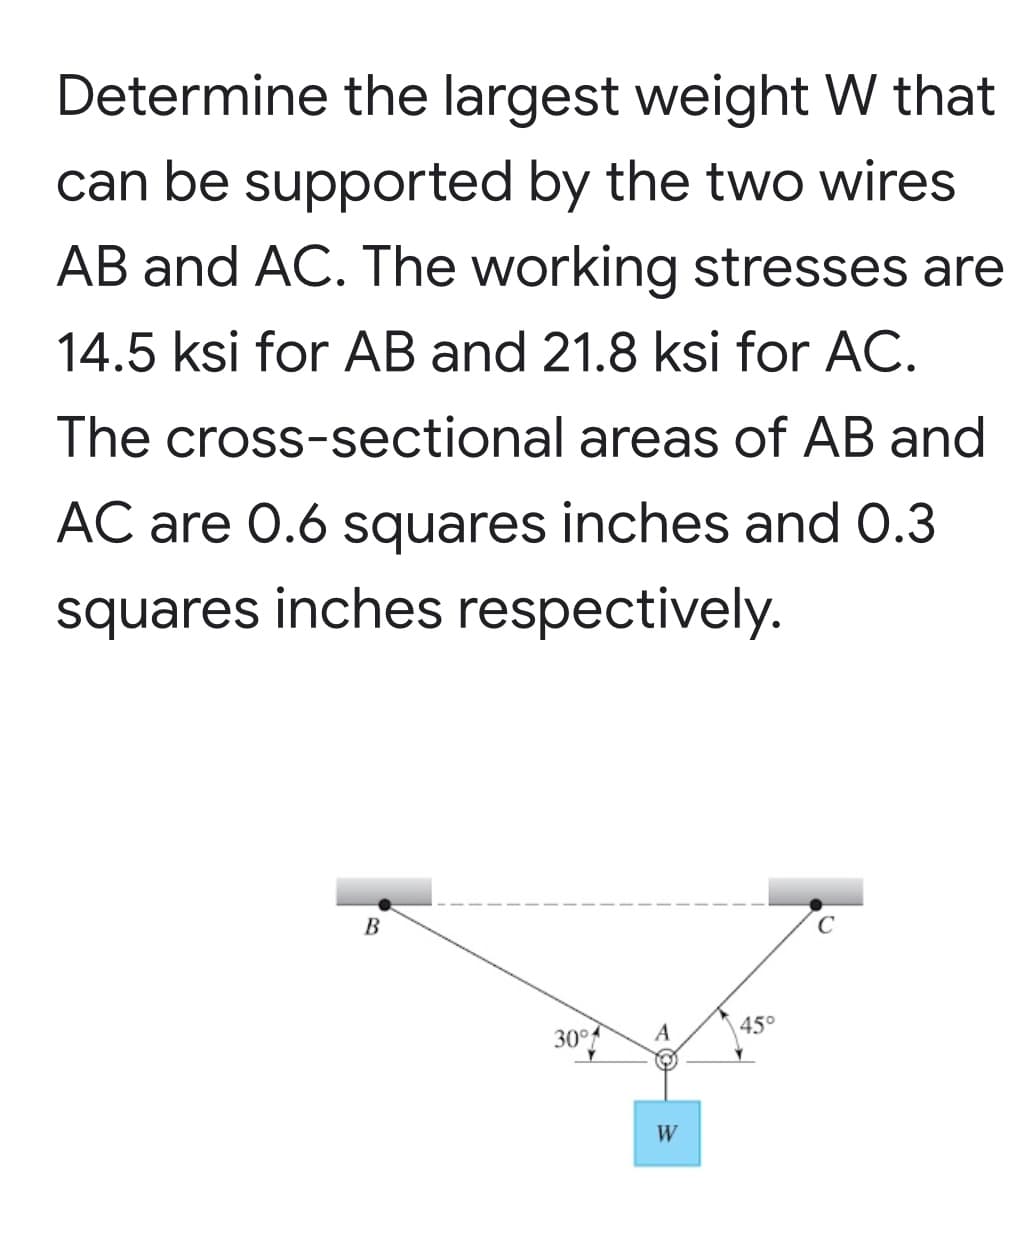 Determine the largest weight W that
can be supported by the two wires
AB and AC. The working stresses are
14.5 ksi for AB and 21.8 ksi for AC.
The cross-sectional areas of AB and
AC are 0.6 squares inches and 0.3
squares inches respectively.
30°
A
45°
W
B.
